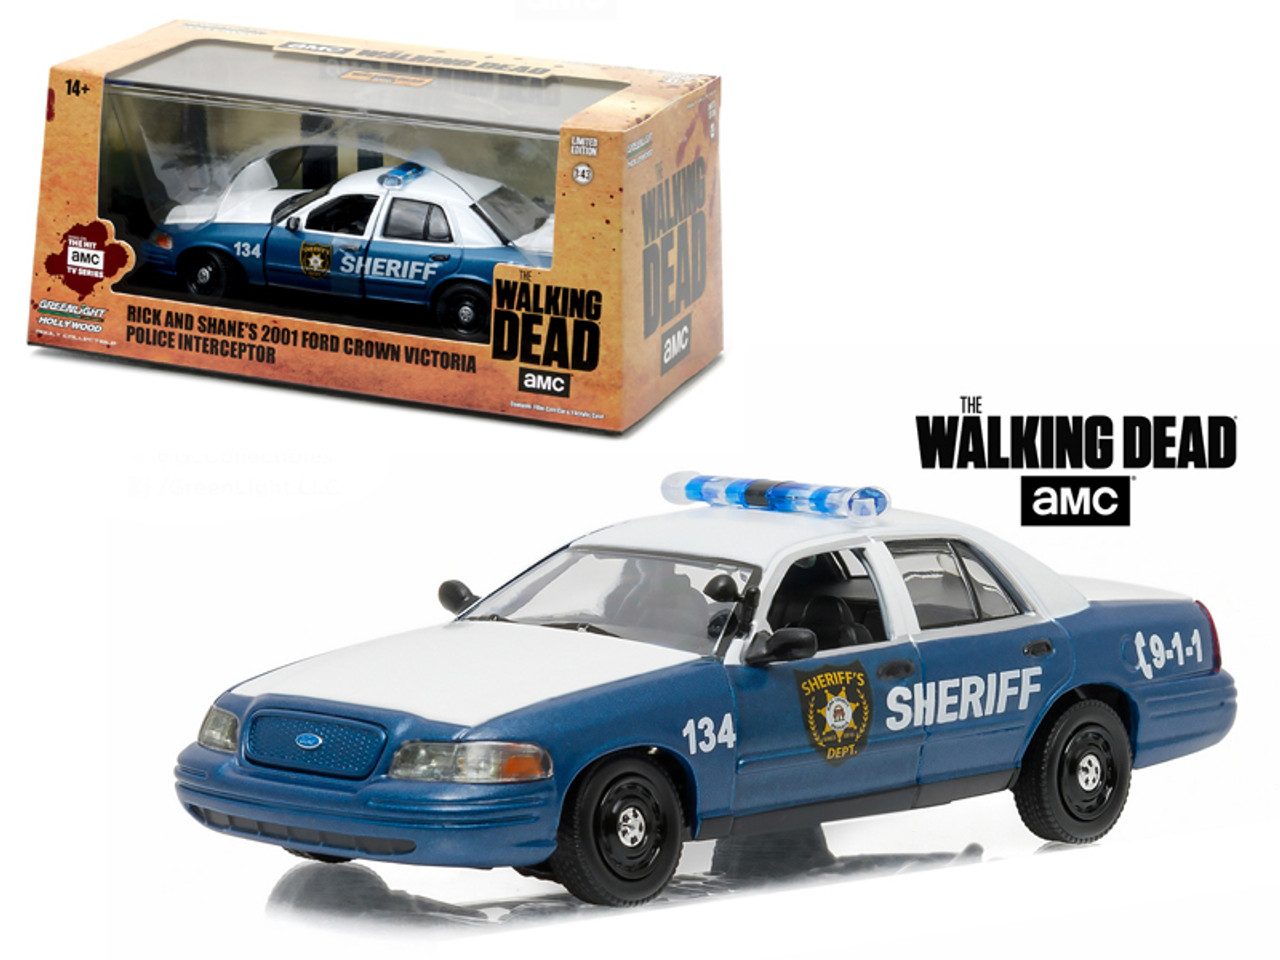 Rick and Shane's 2001 Ford Crown Victoria Police Interceptor "The Walking Dead" (2010-Current) TV Series 1/43 Diecast Model Car by Greenlight